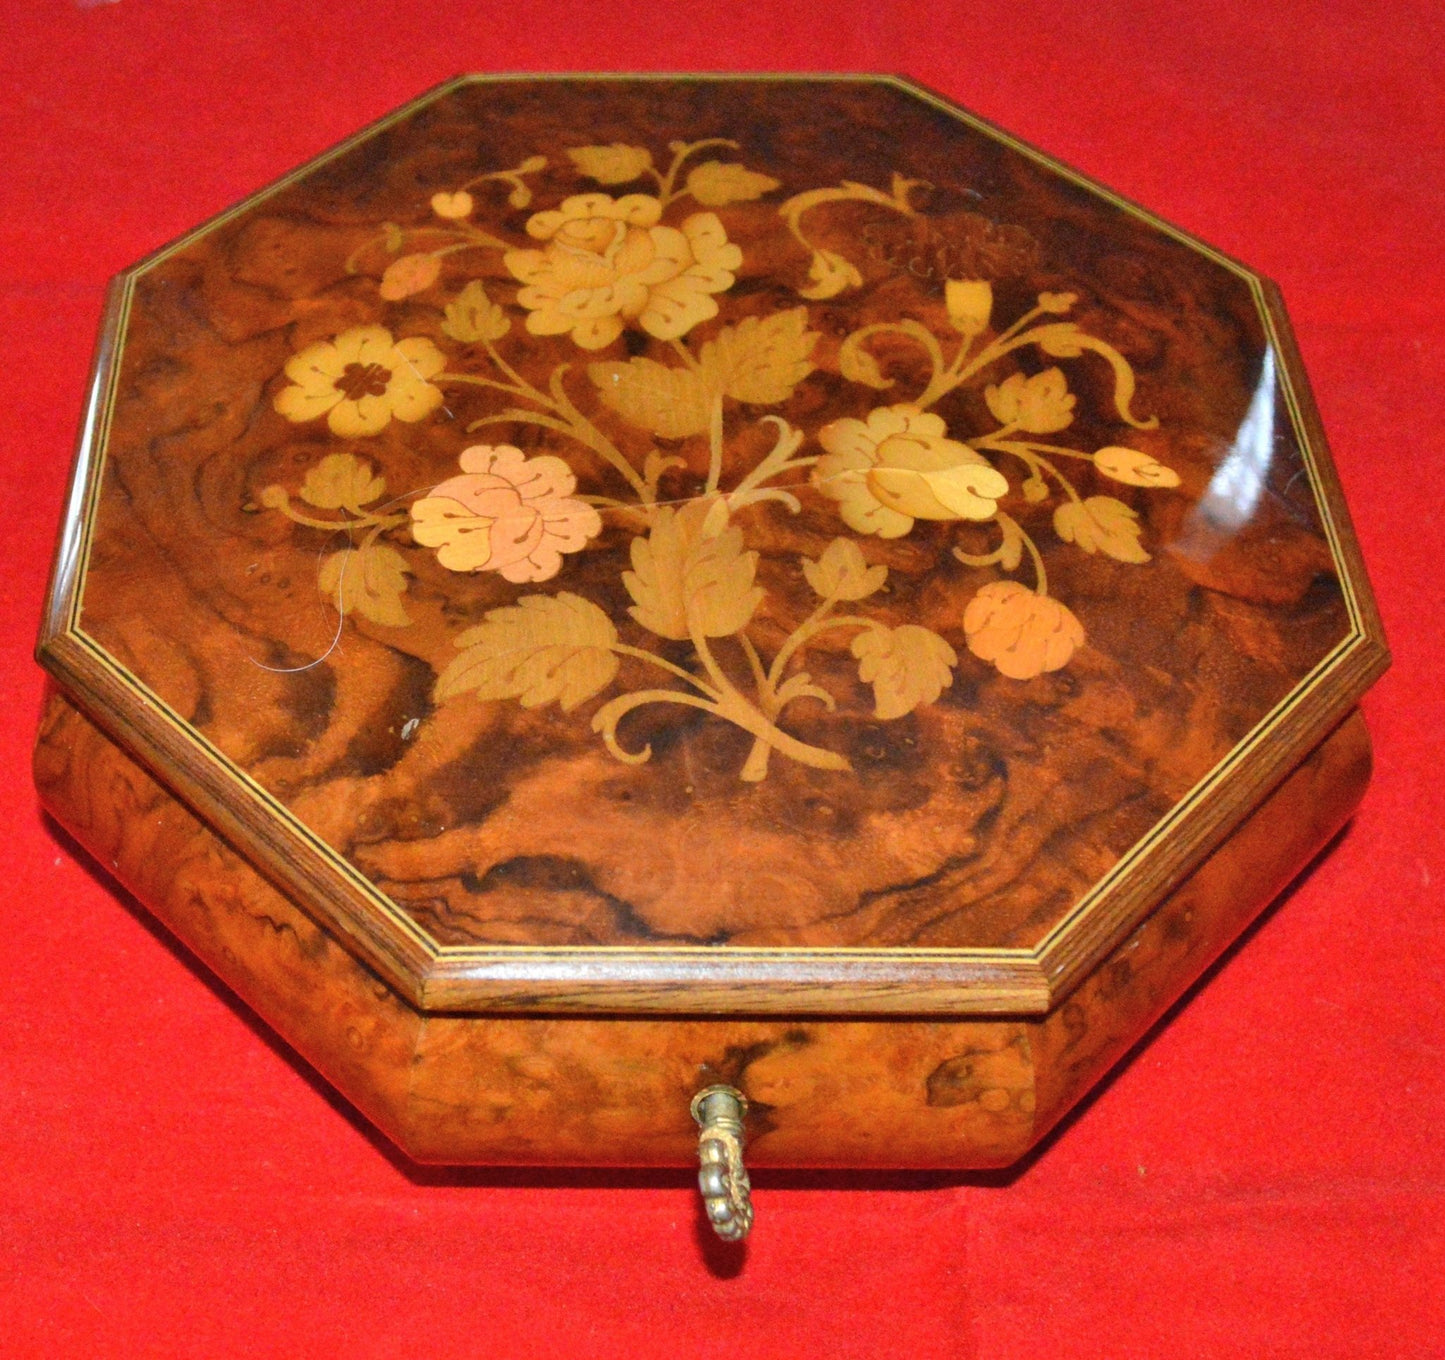 SORRENTO OCTAGONAL MARQUETRY MUSICAL JEWELLERY BOX PLAYS LOVE STORY(PREVIOUSLY OWNED) GOOD CONDITION - TMD167207